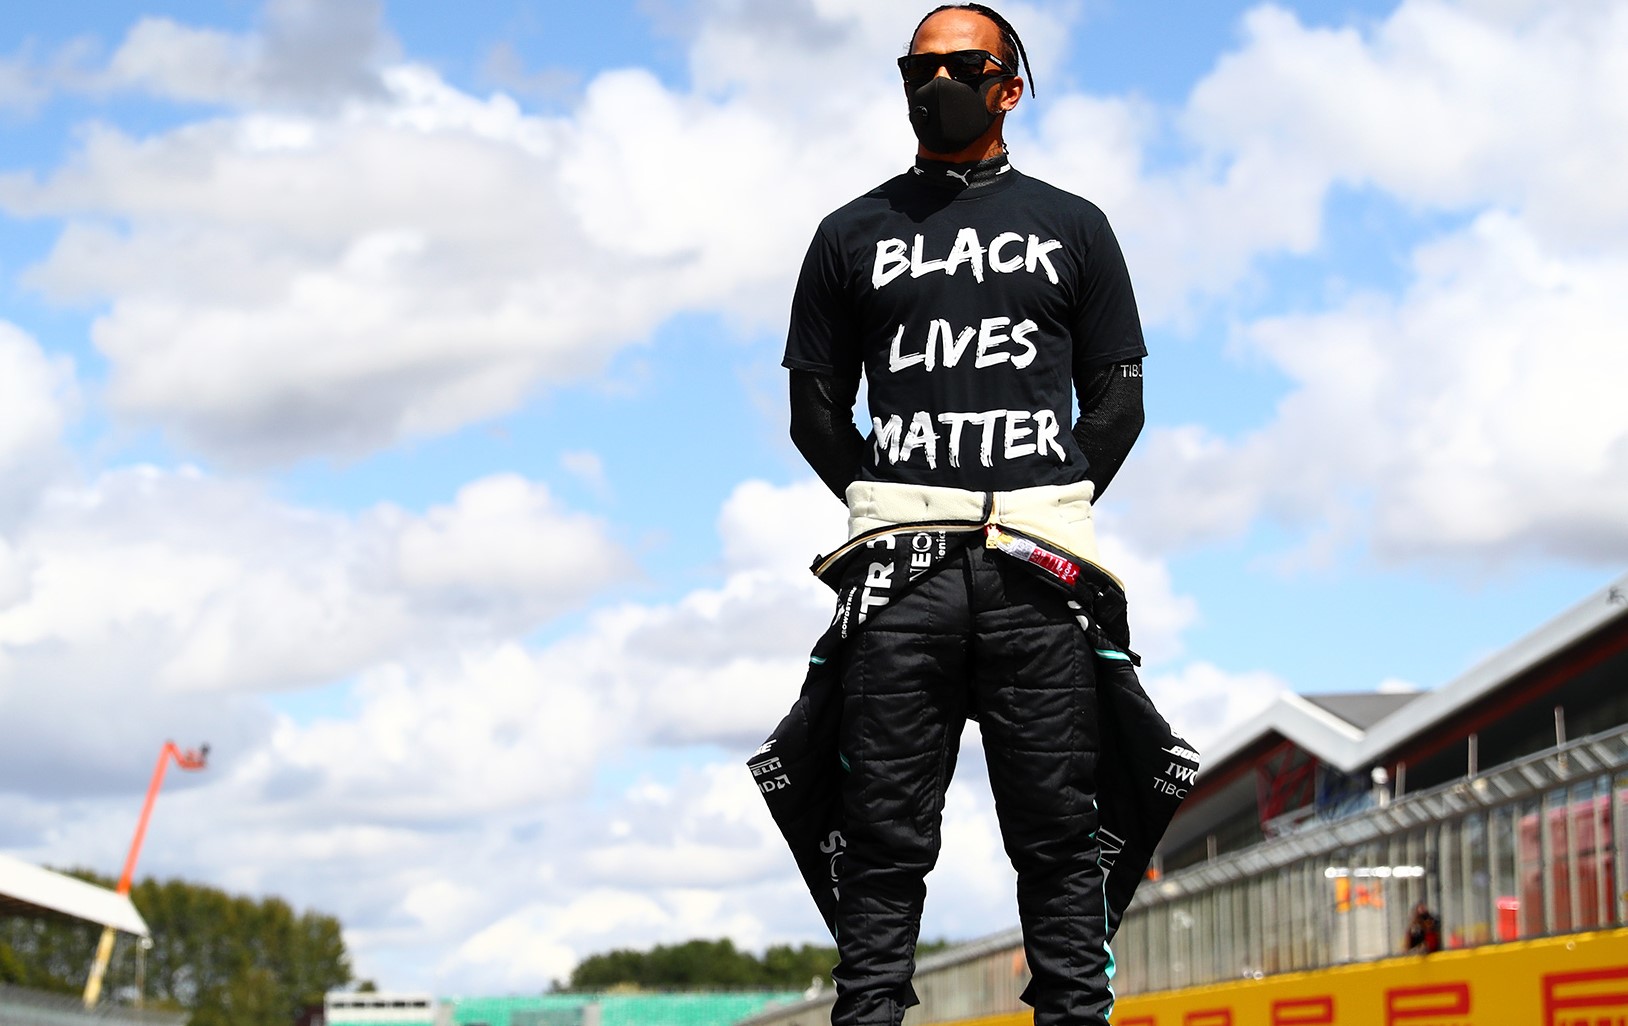 Sky donates £1m to Lewis Hamilton's charity to address school exclusions among Black students